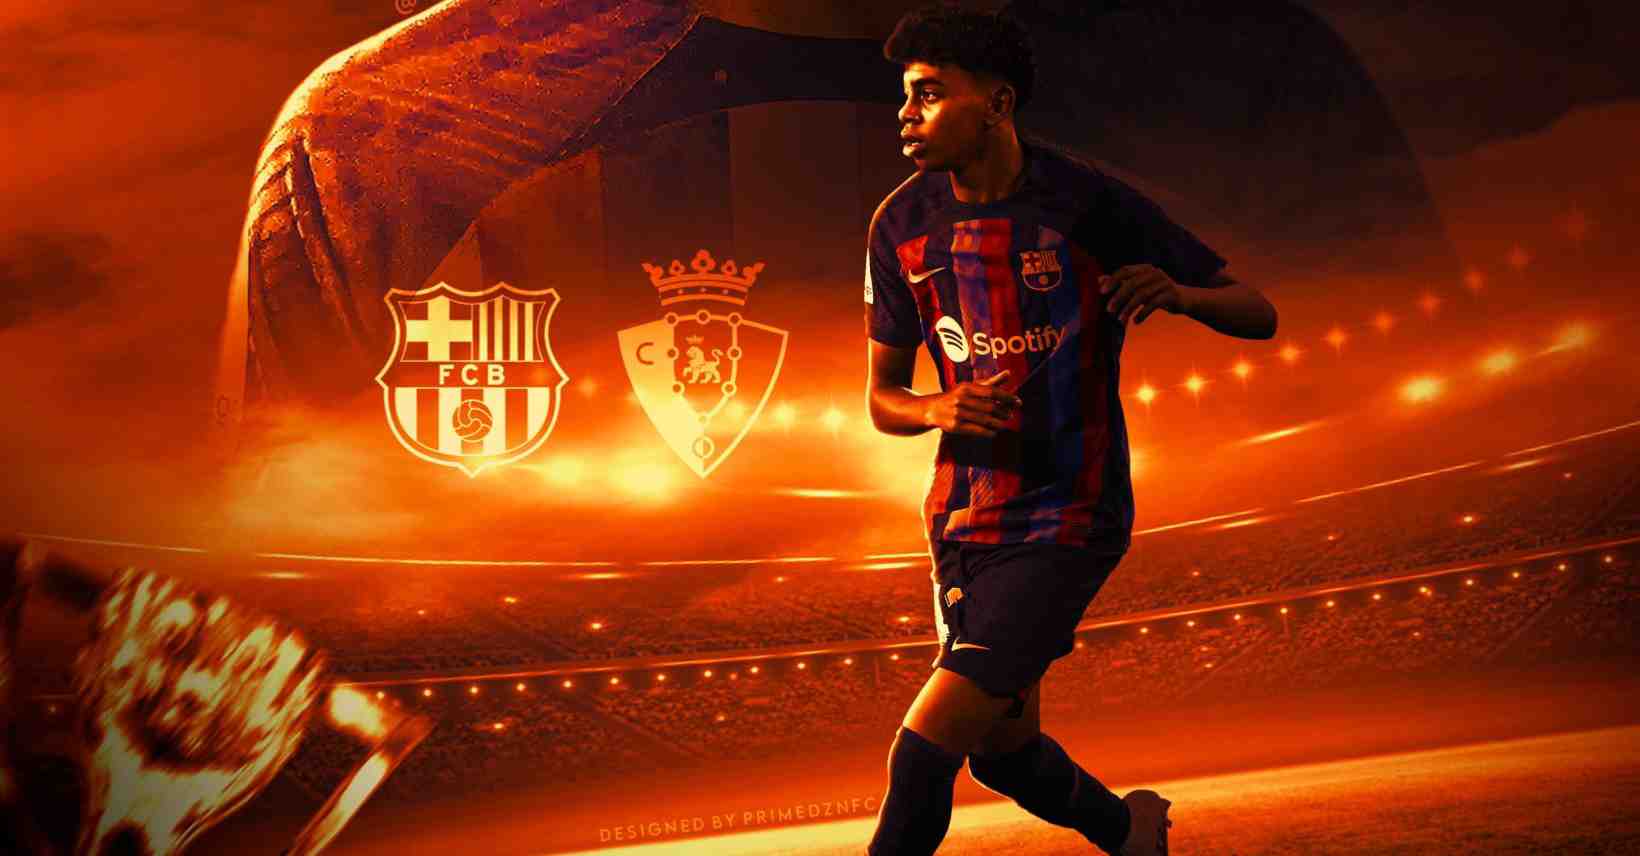 FC Barcelona vs Osasuna - Predicted Lineups, Squad List & Match Preview(Laliga Matchday 33) After securing a dominant win over Real Betis at the weekend, FC Barcelona welcome Osasuna to the Camp nou for the Matchday 33 fixture in Laliga. #barcelona #osasuna #barçaosasunas #barcaosasuna #osasunabarça #LaLiga #Ferran #lamineyamal #barca #fcblive #fcbarcelona #barcelona #ferrantorres #torres #pedri #gavi #barcanews #frenkiedejong #roberto #dembele #CHRISTENSEN #Araujo #Kounde